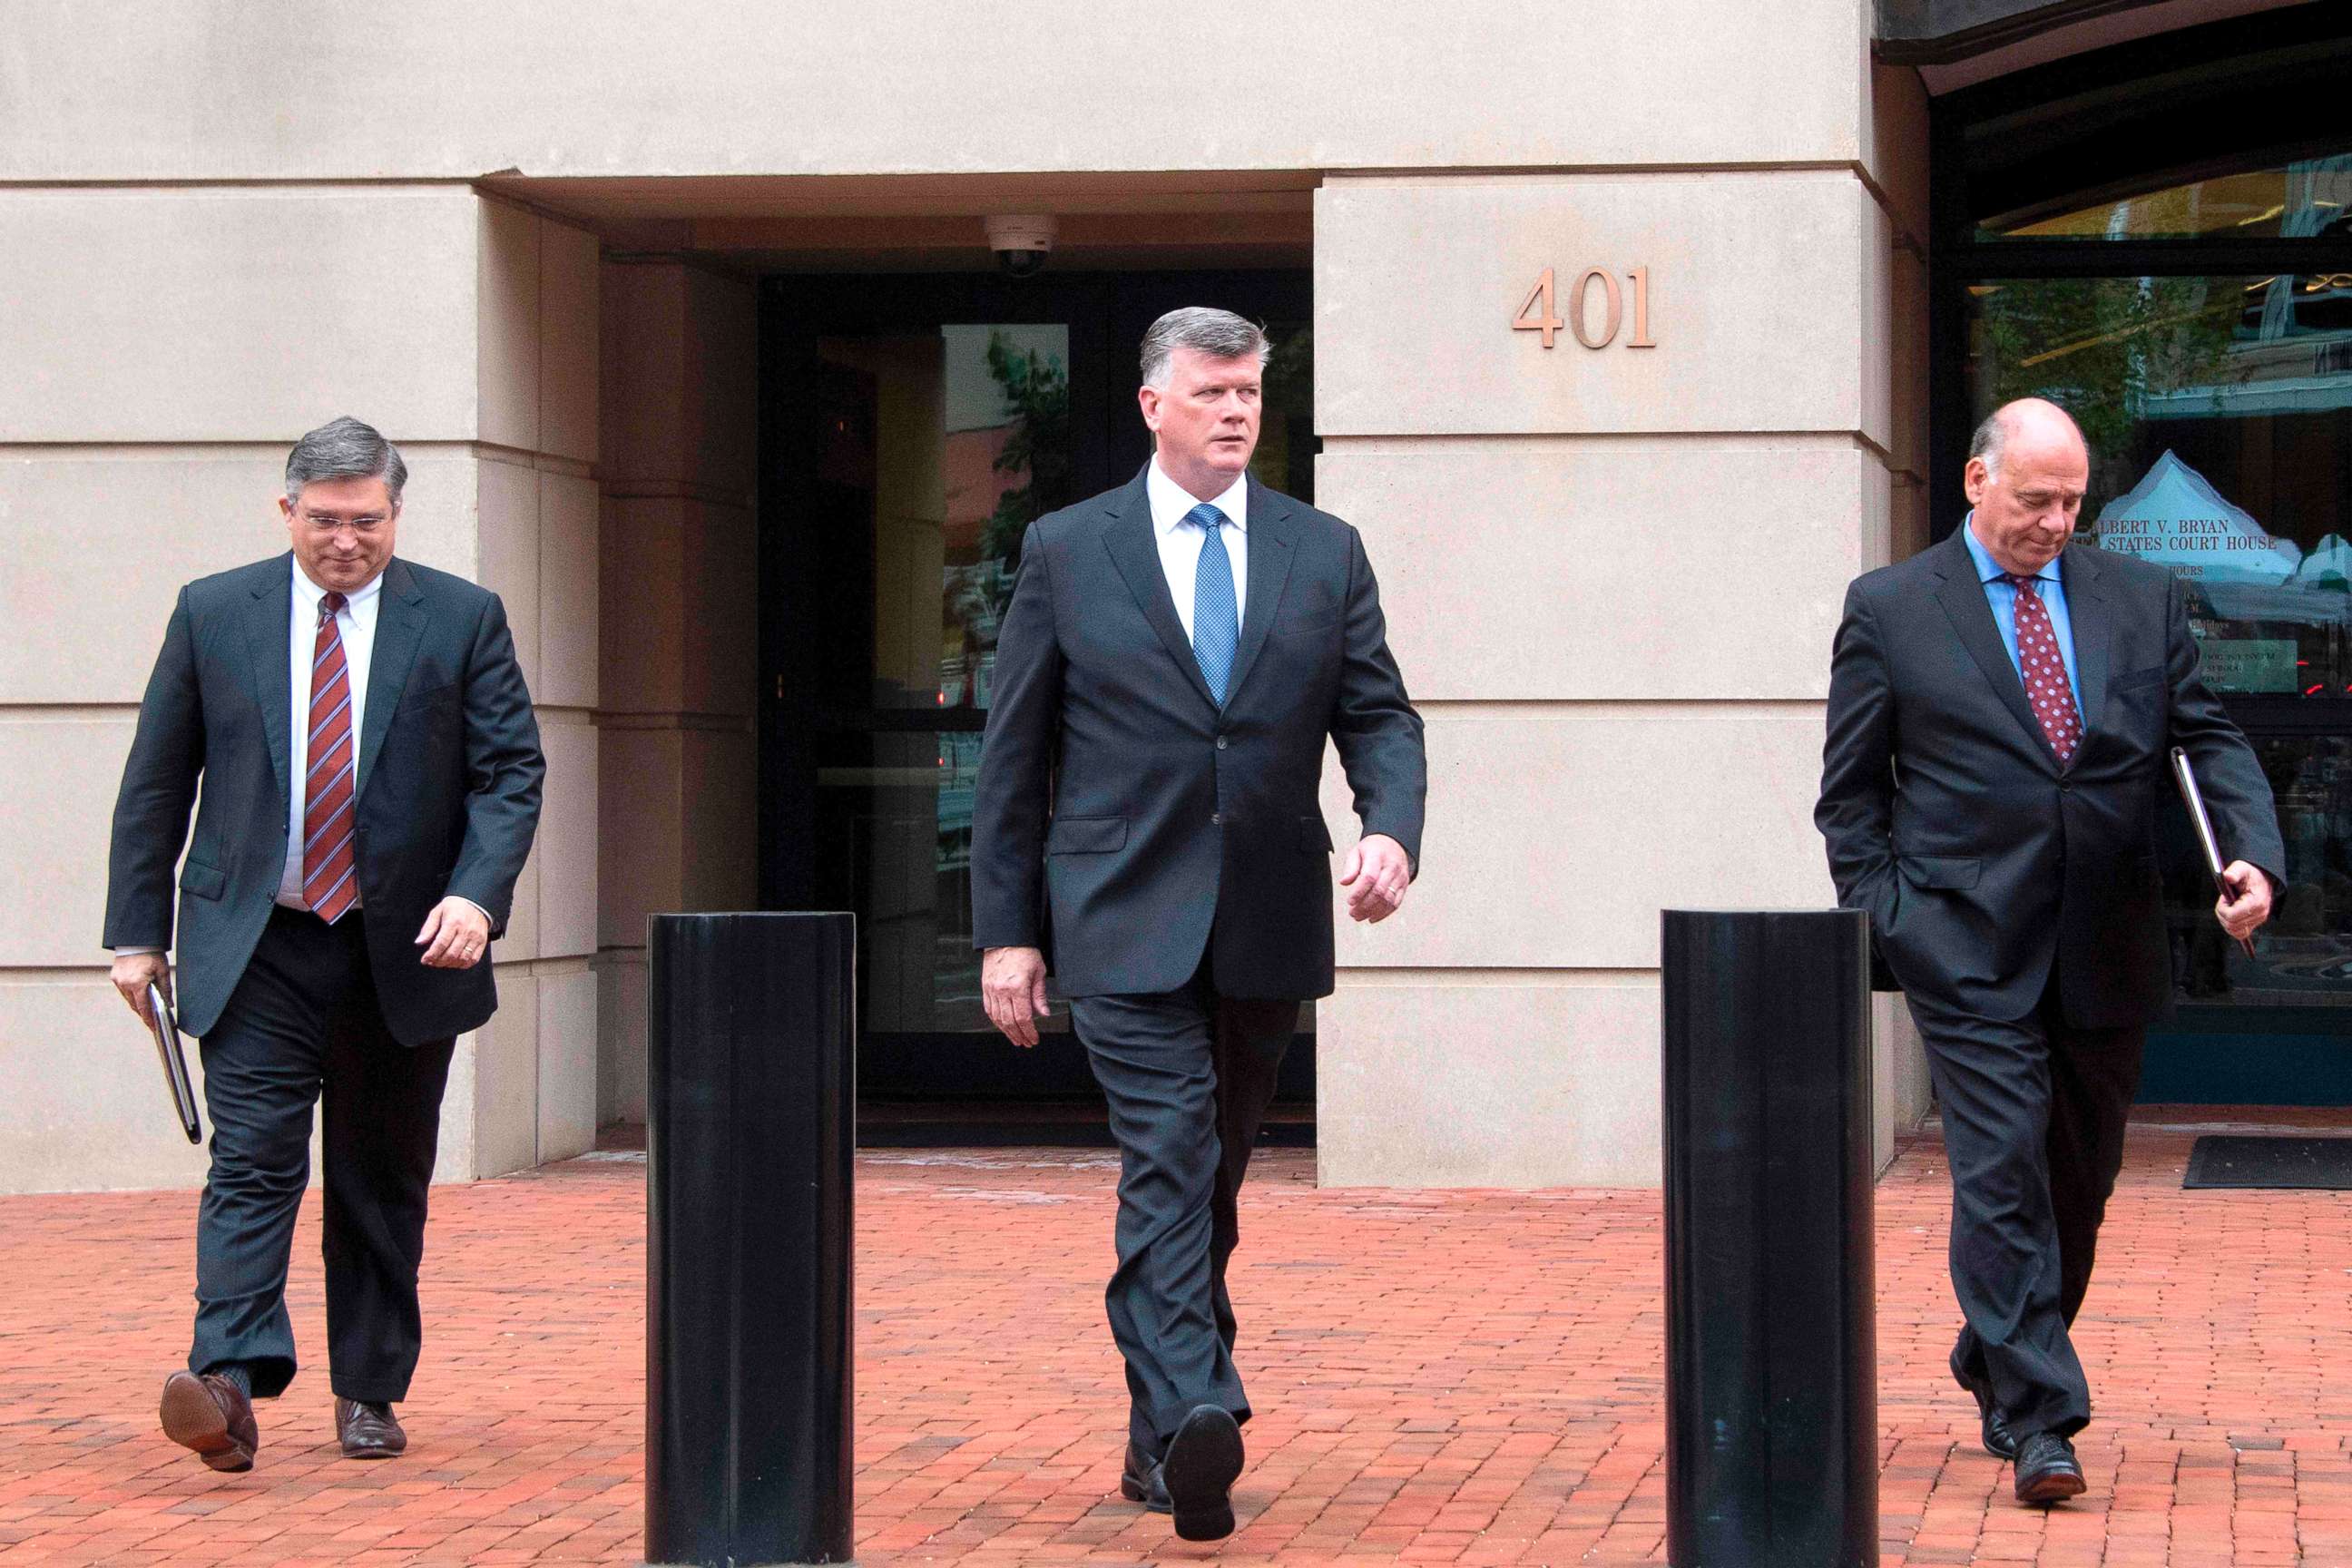 PHOTO: The defense attorneys for former Trump campaign manager Paul Manafort, including lead attorney Kevin Downing (C), Richard Westling (L) and Thomas Zehnle (R), depart the US Courthouse in Alexandria, Va., Aug. 21, 2018.